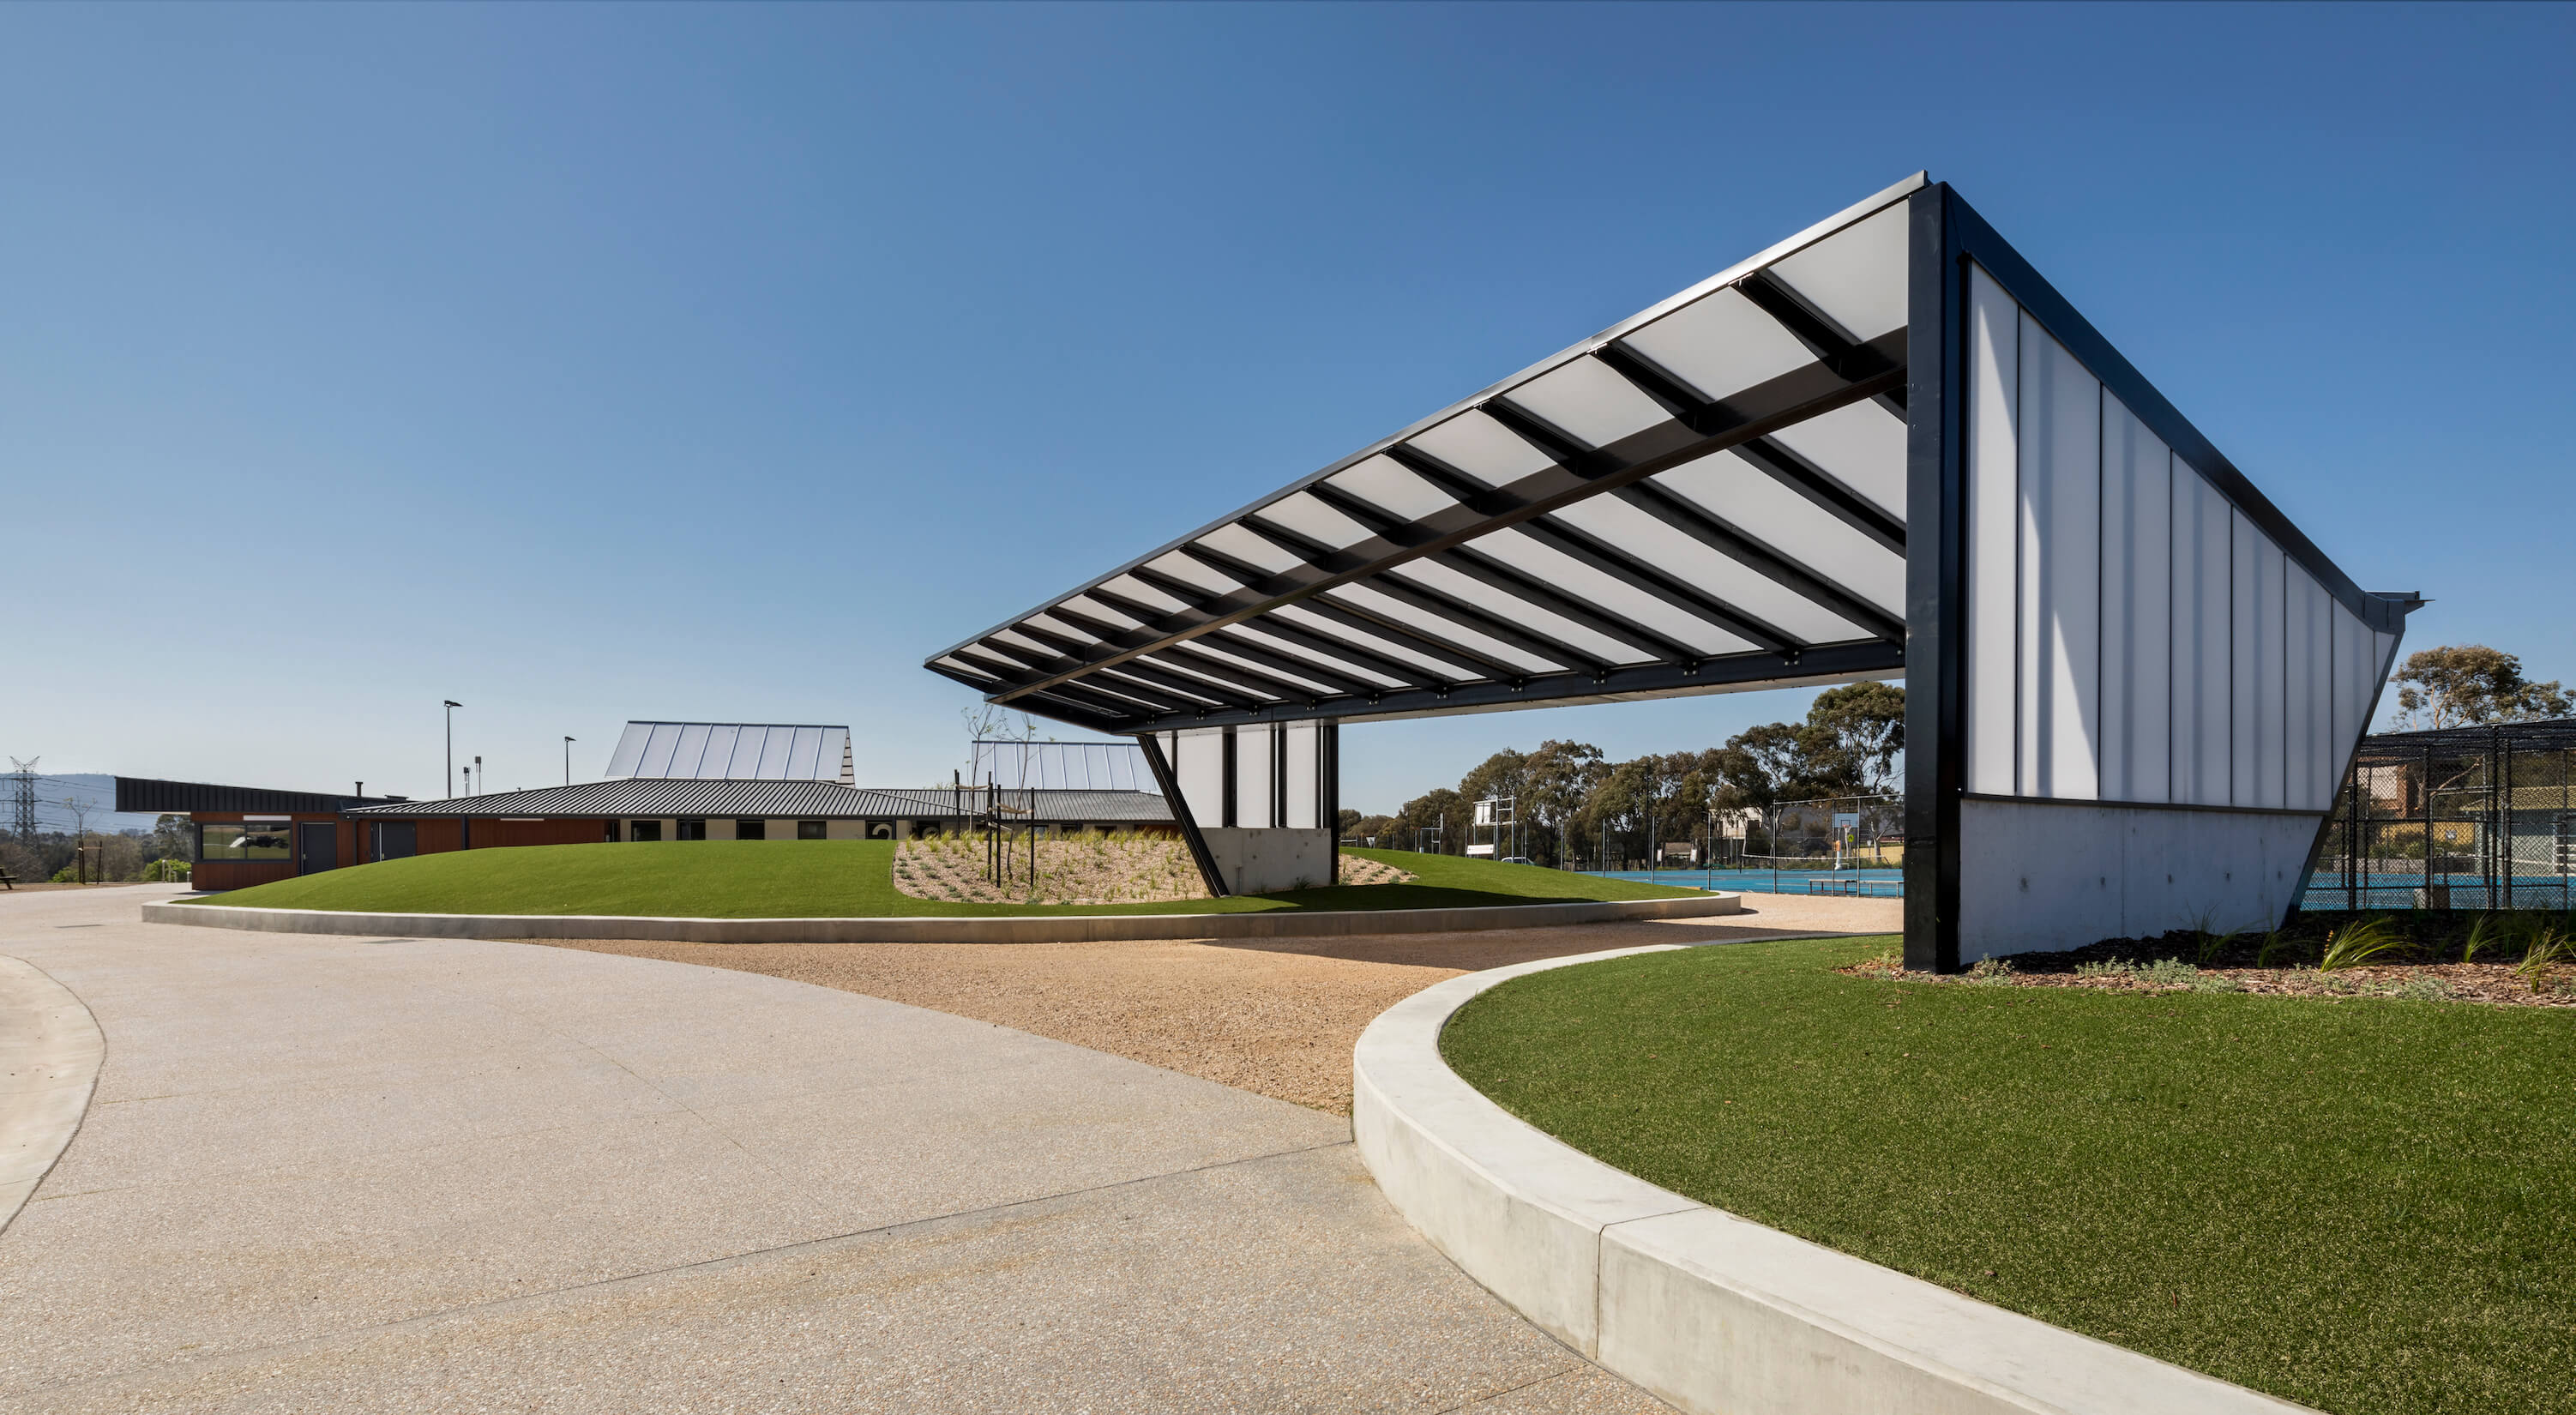 Shade structure straddles two grassy mounds next to tennis court